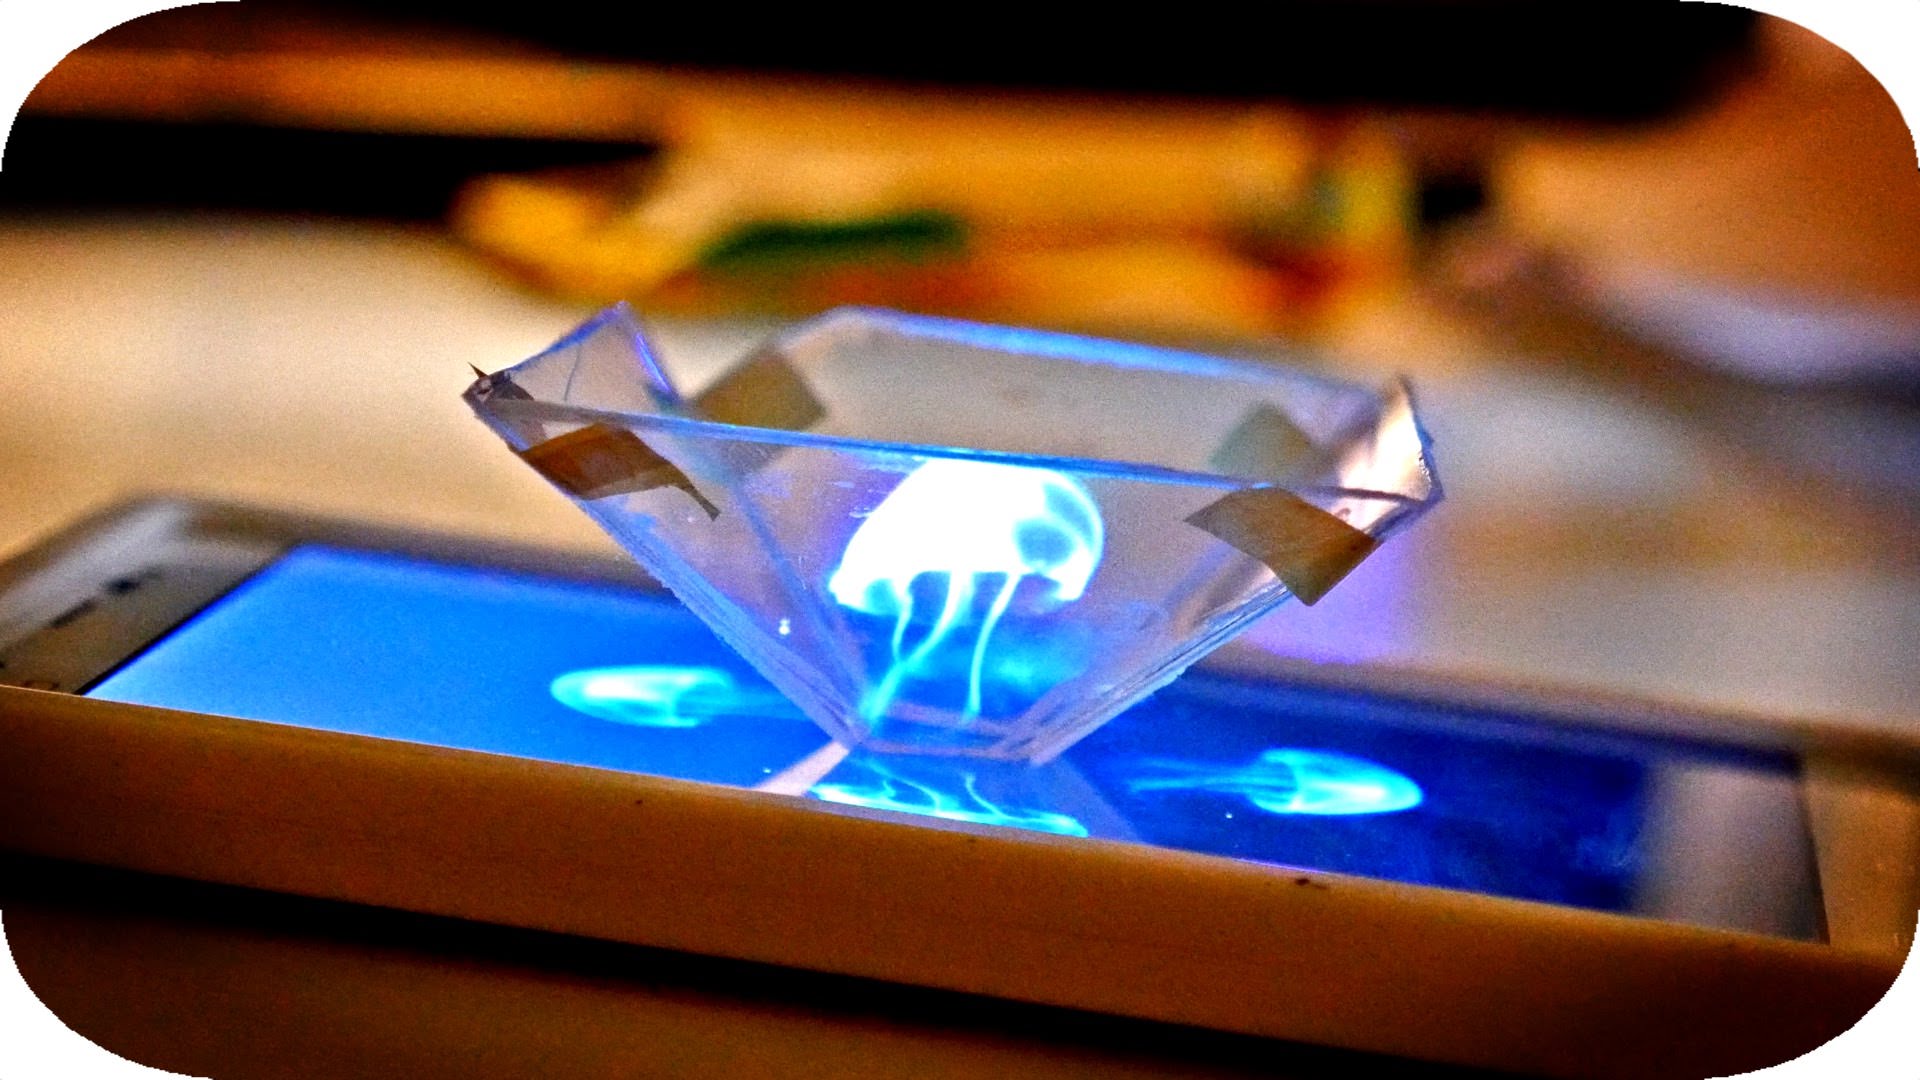 How To Turn Your Smart Phone Into A 3D Hologram Projector – Step by Step with Video